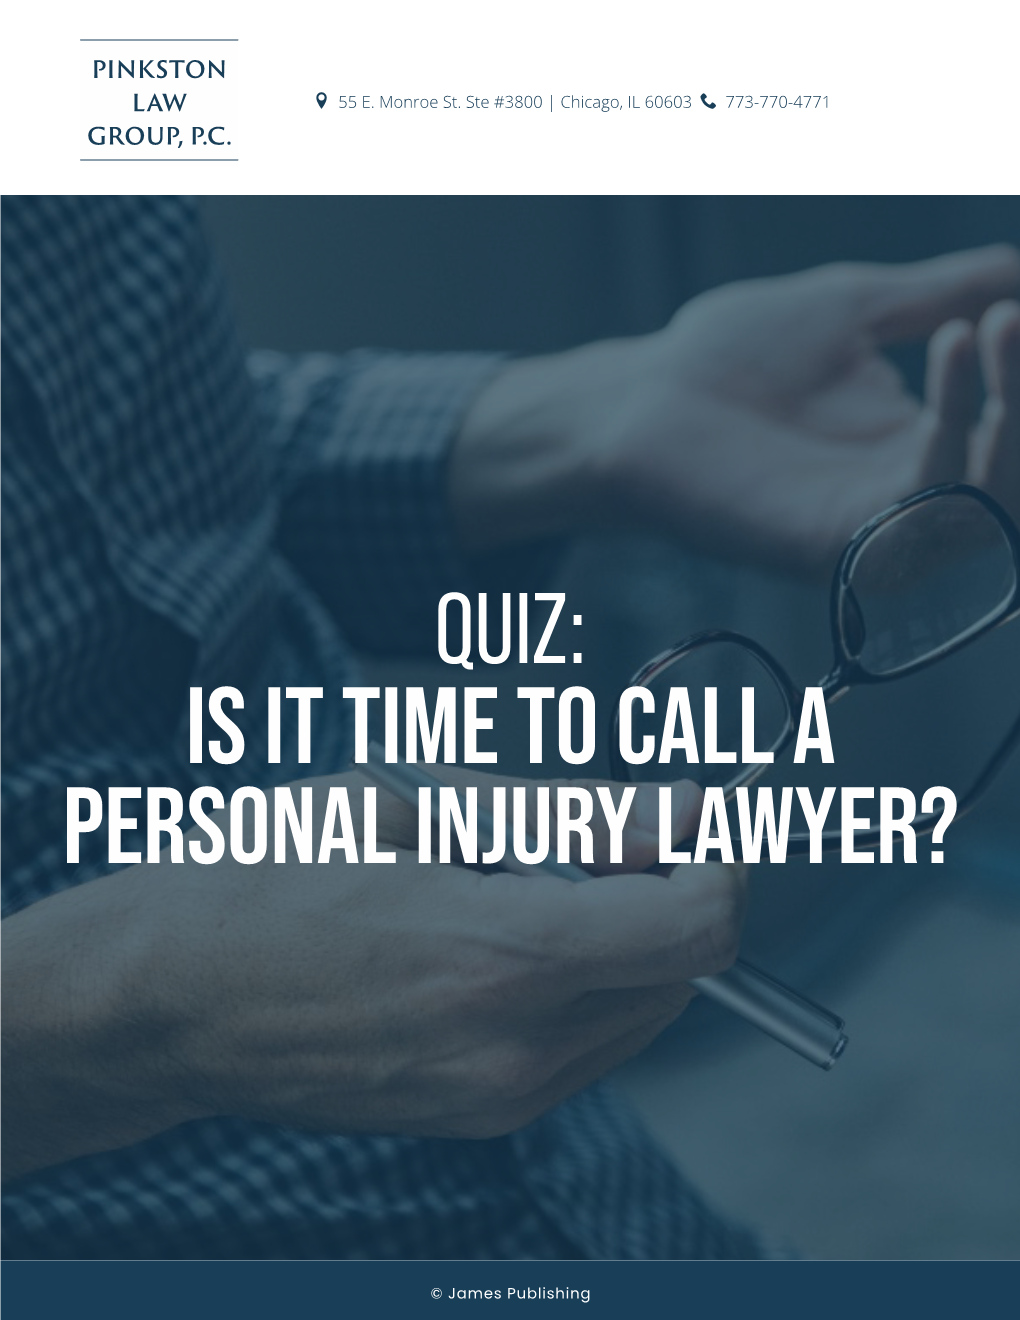 Is It Time to Call a Personal Injury Lawyer?